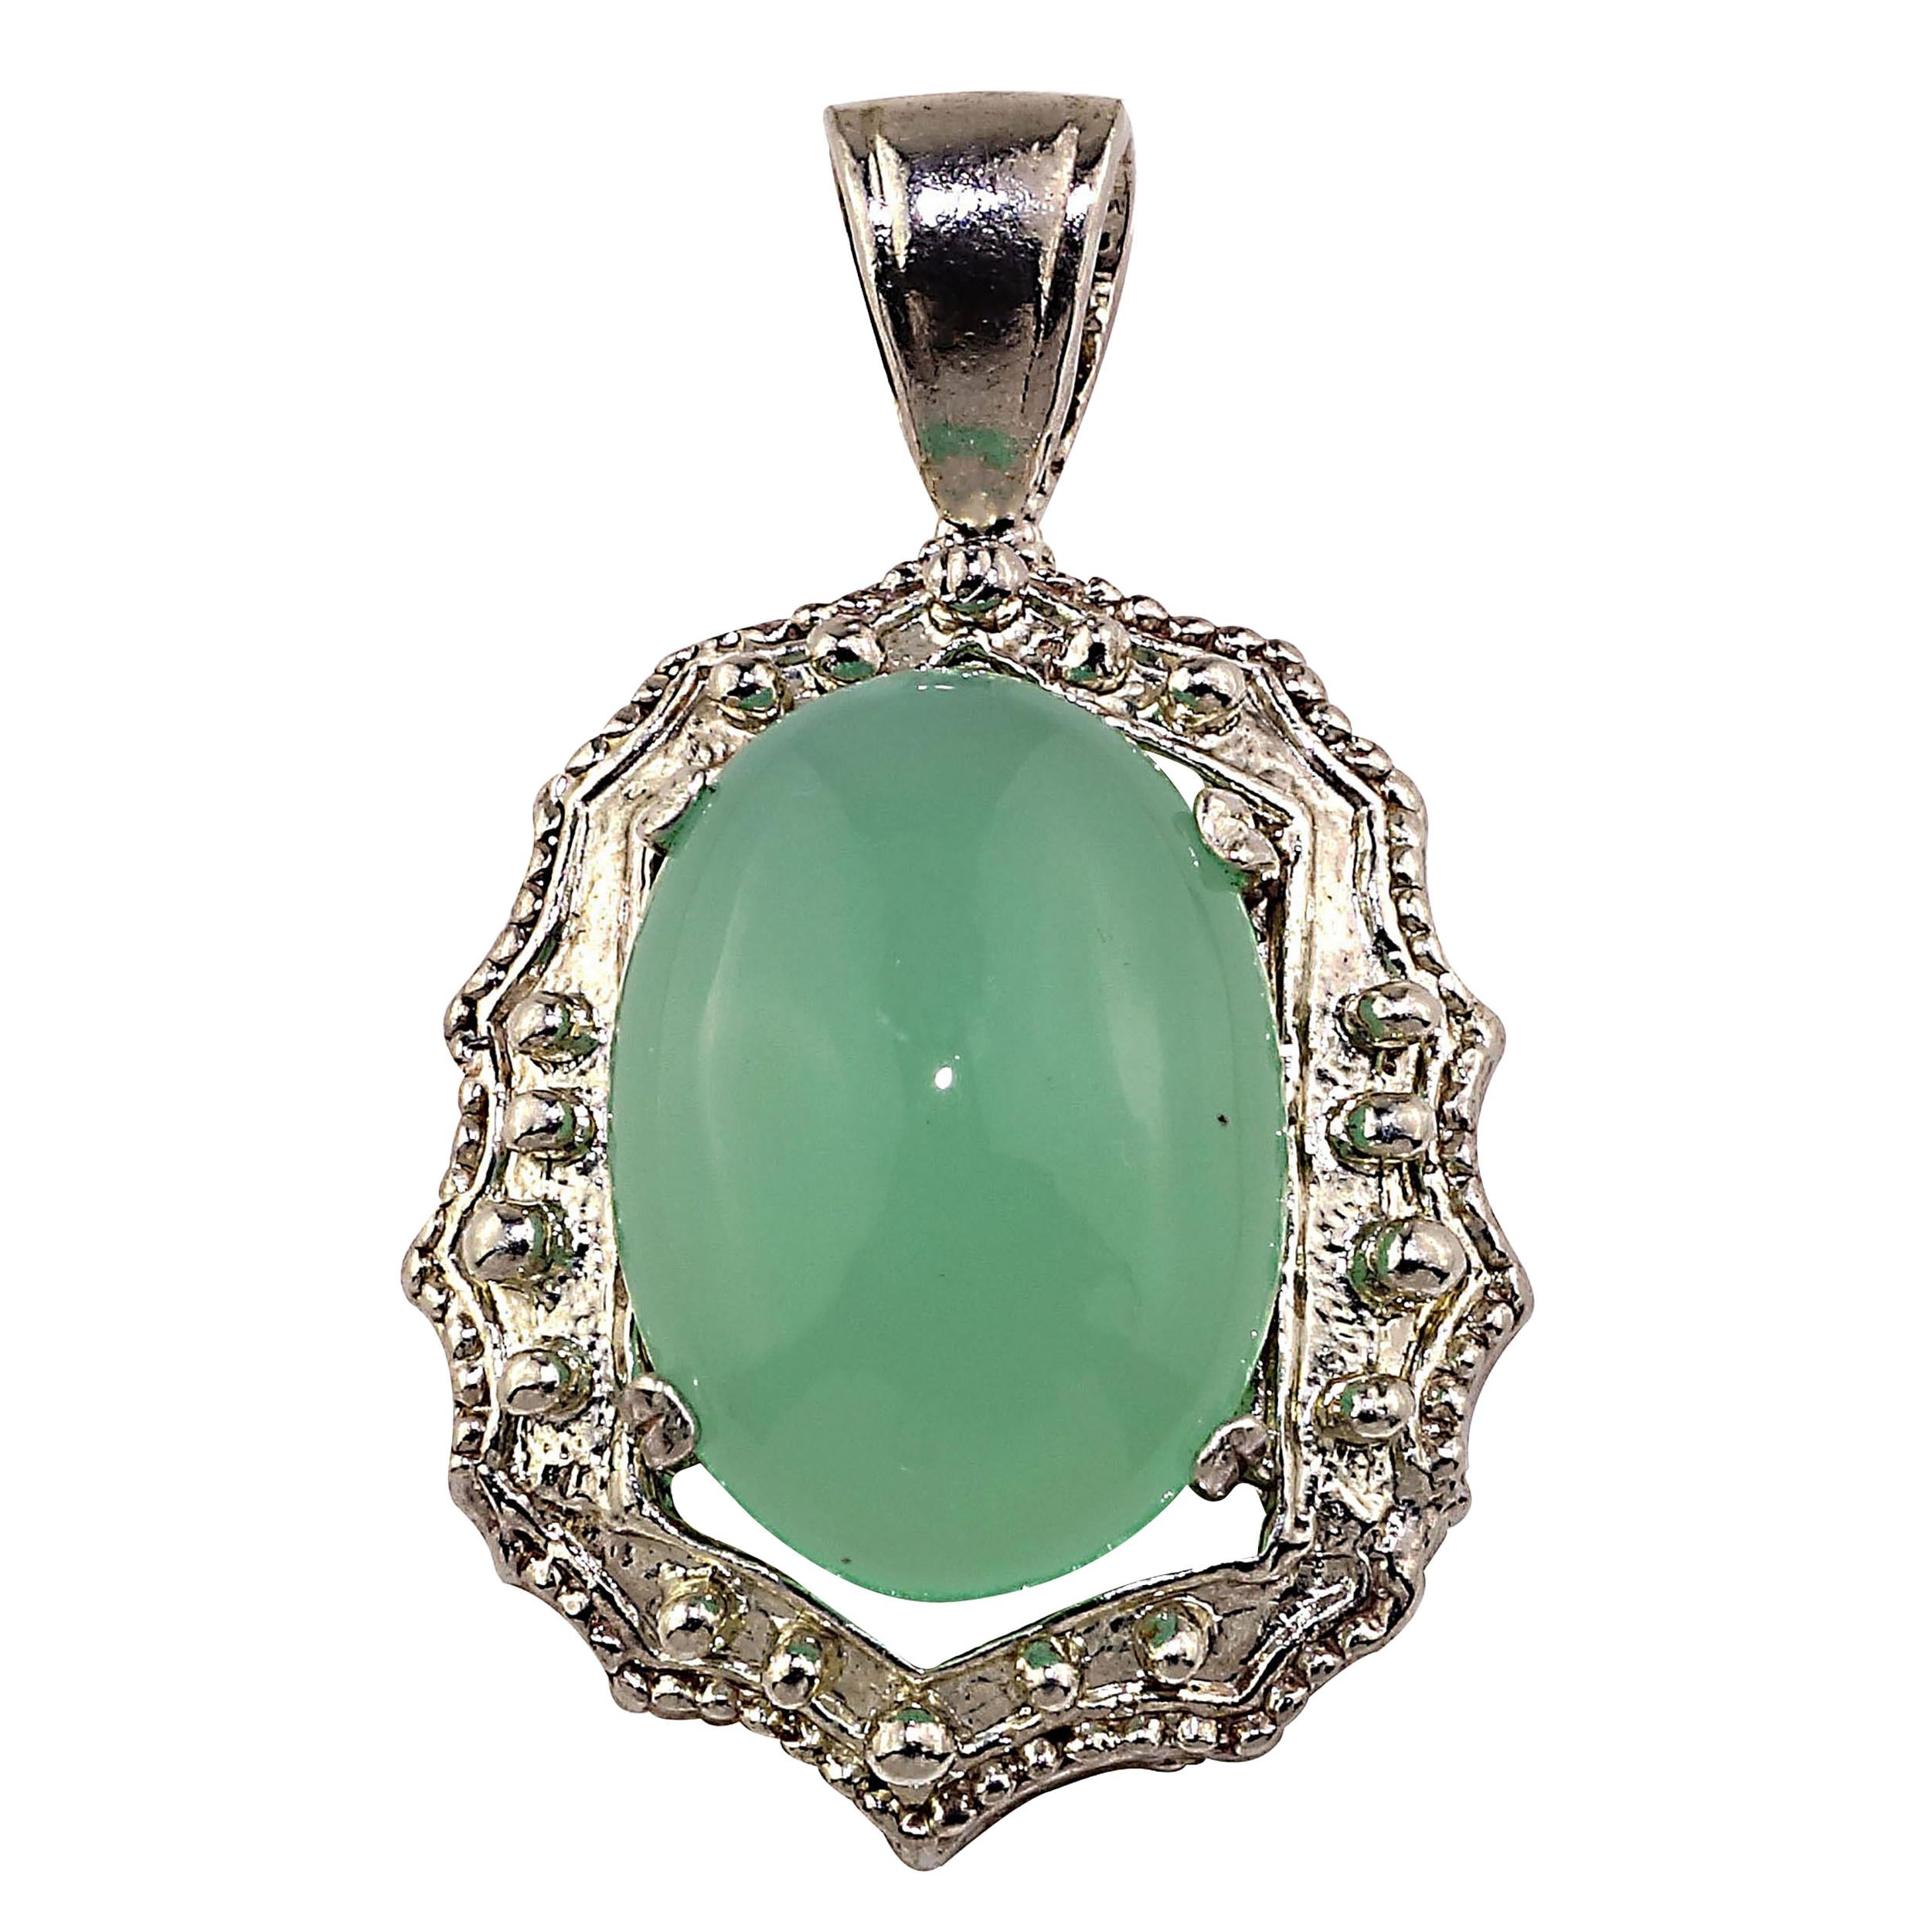 AJD Glowing Translucent Cabochon Chrysophrase in Sterling Silver Pendant